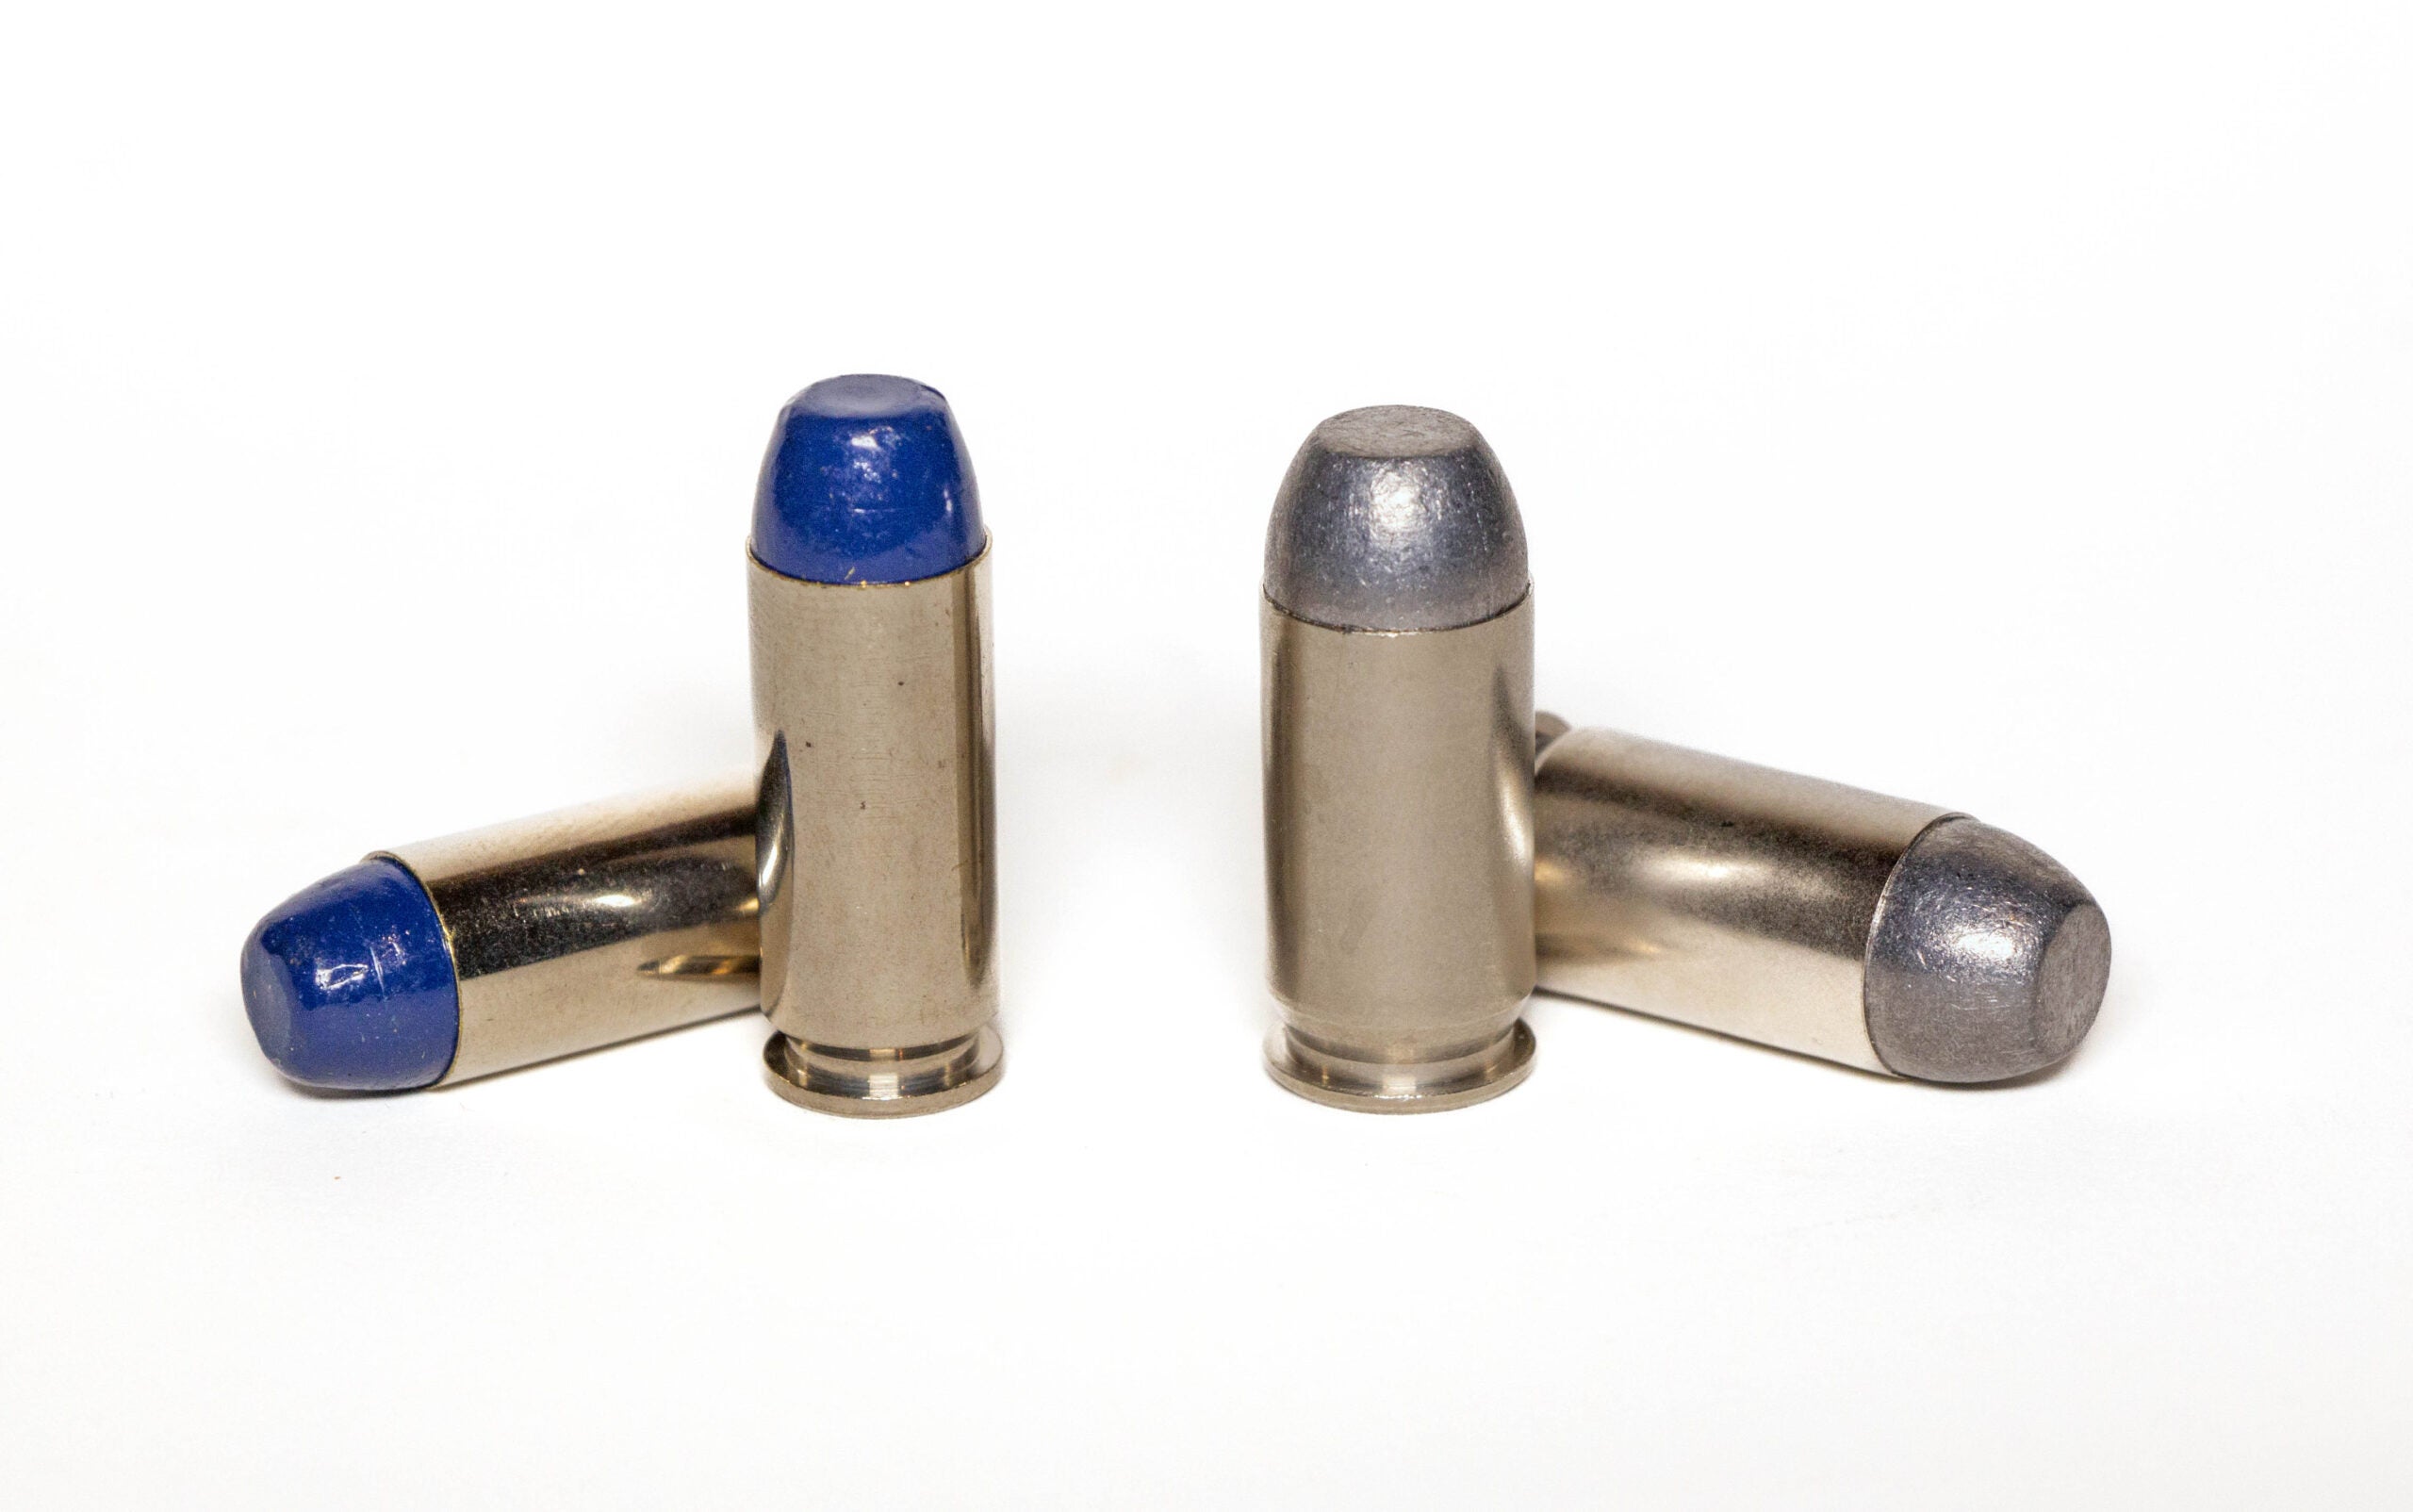 photo showing 10mm auto ammo on the left and 45 acp ammo on the right